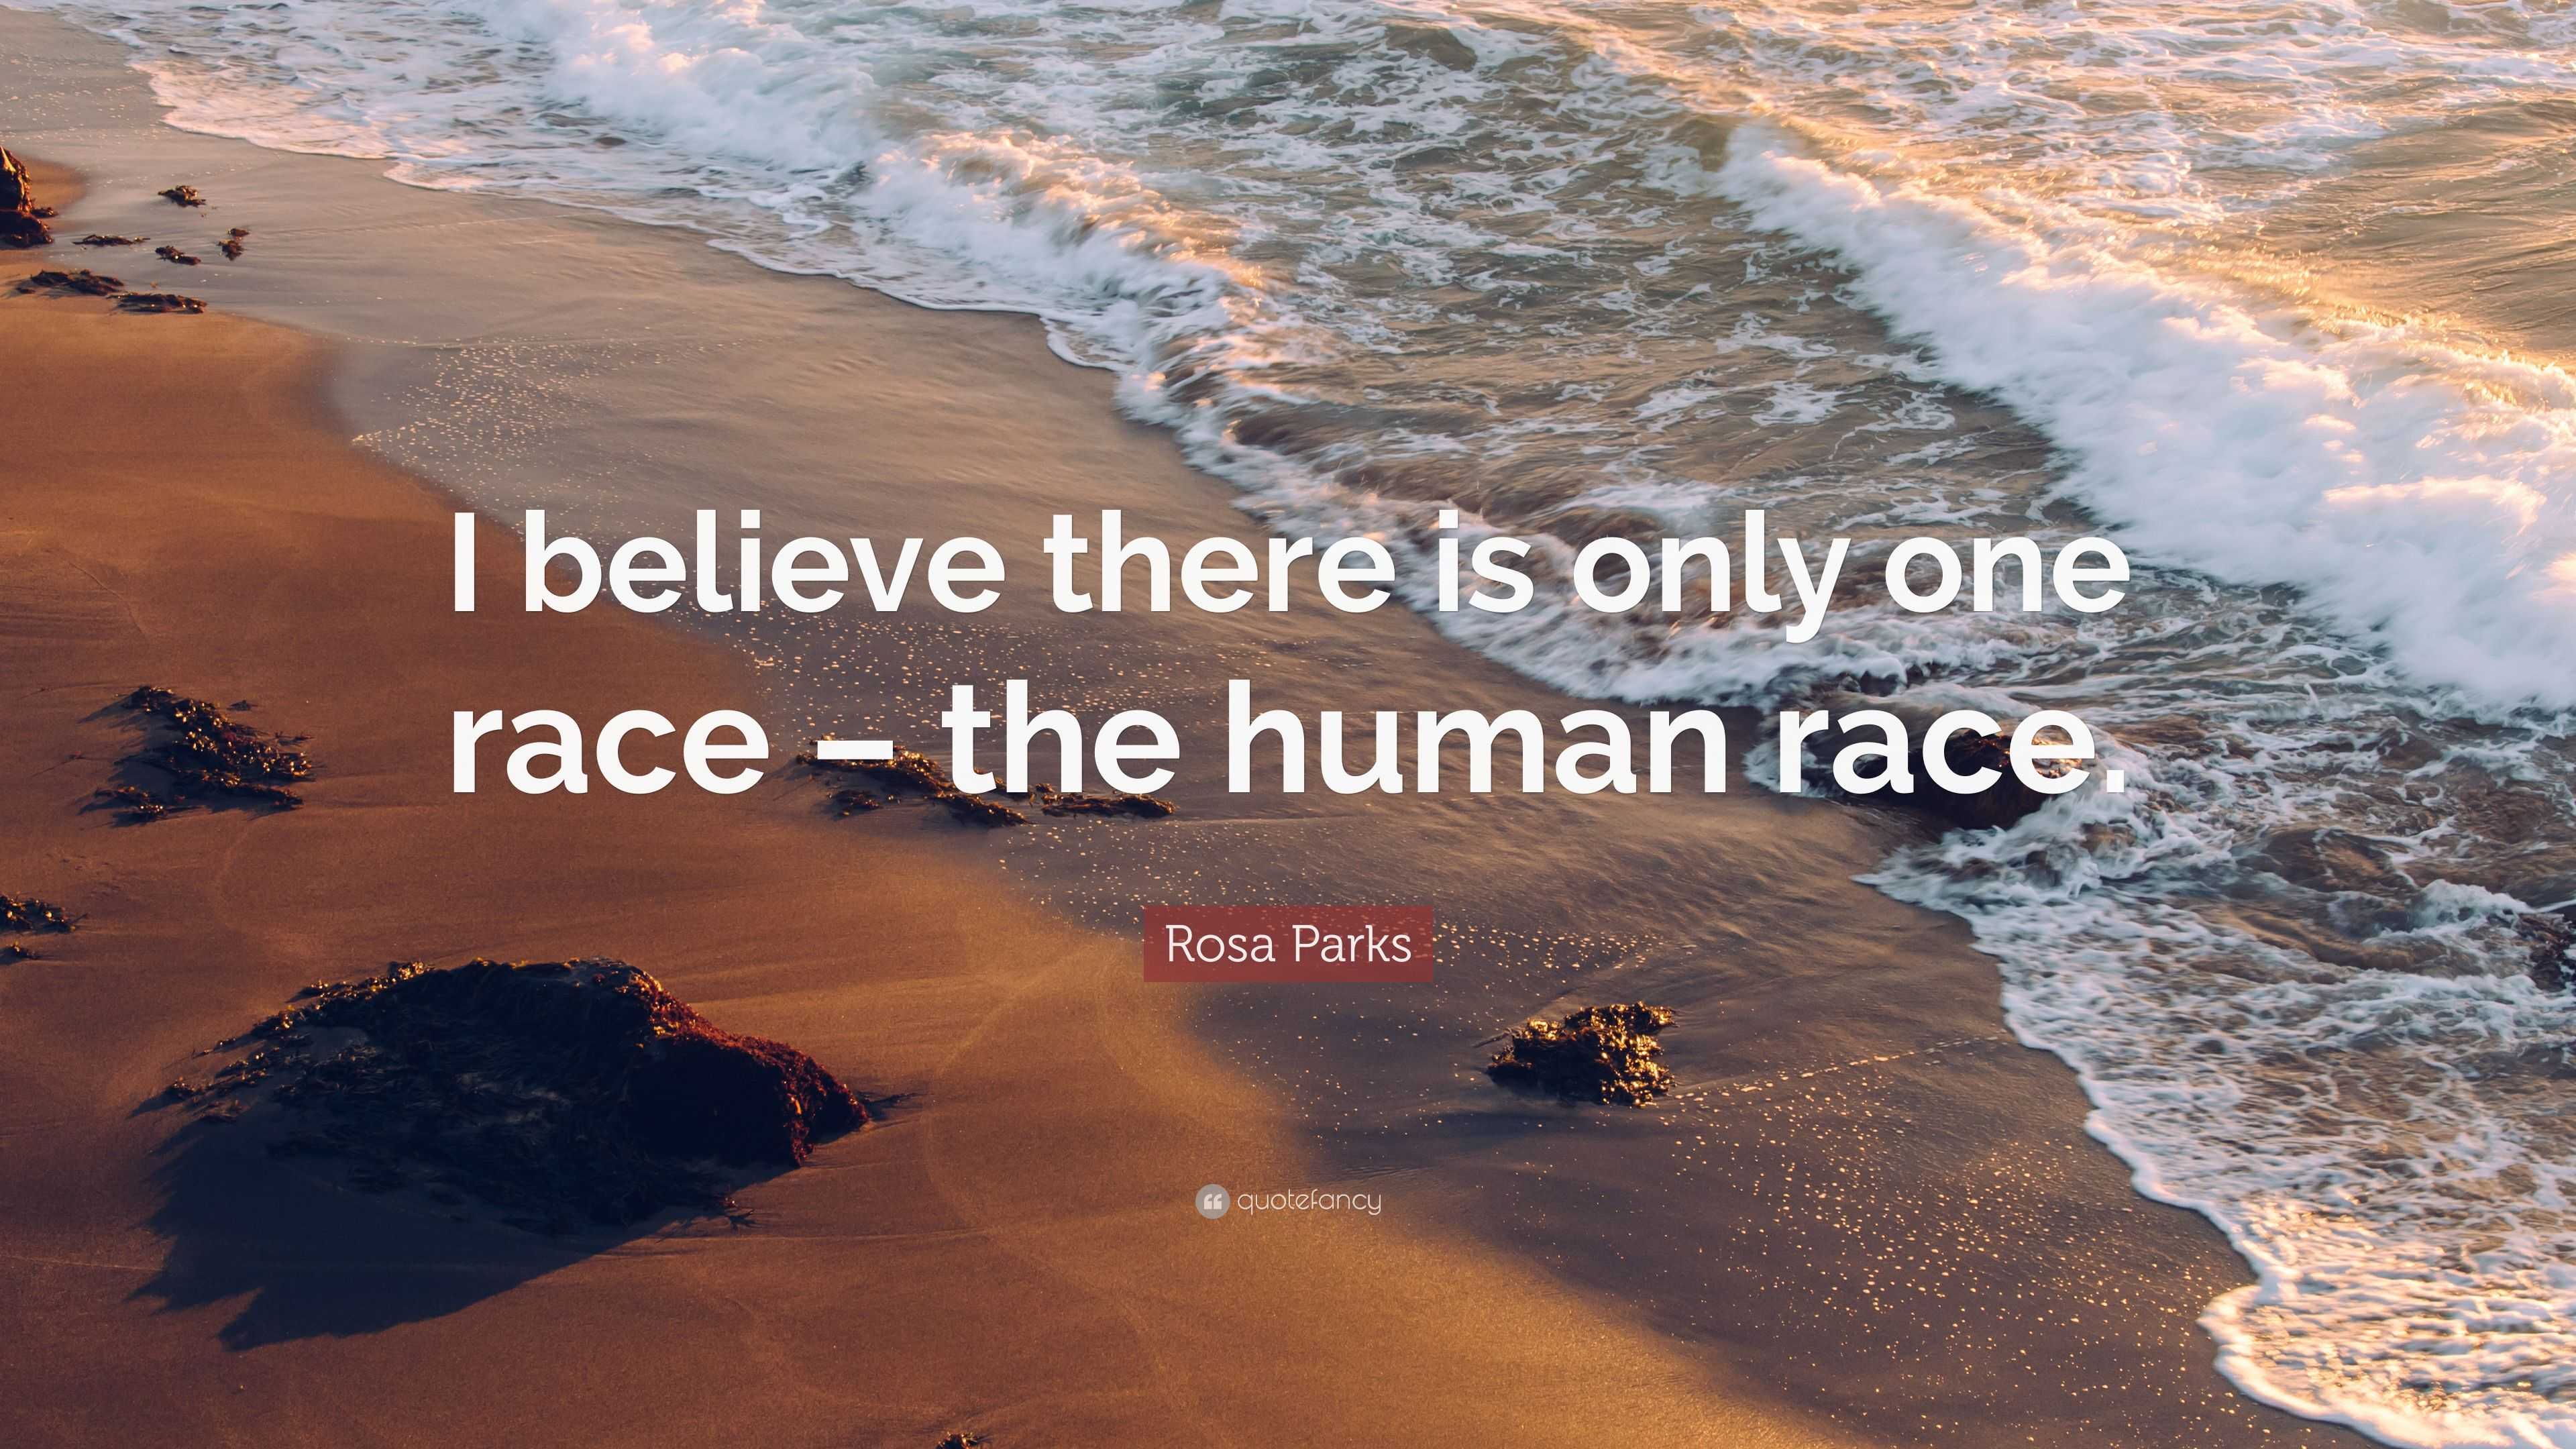 Rosa Parks Quote “I believe there is only one race the human race.”